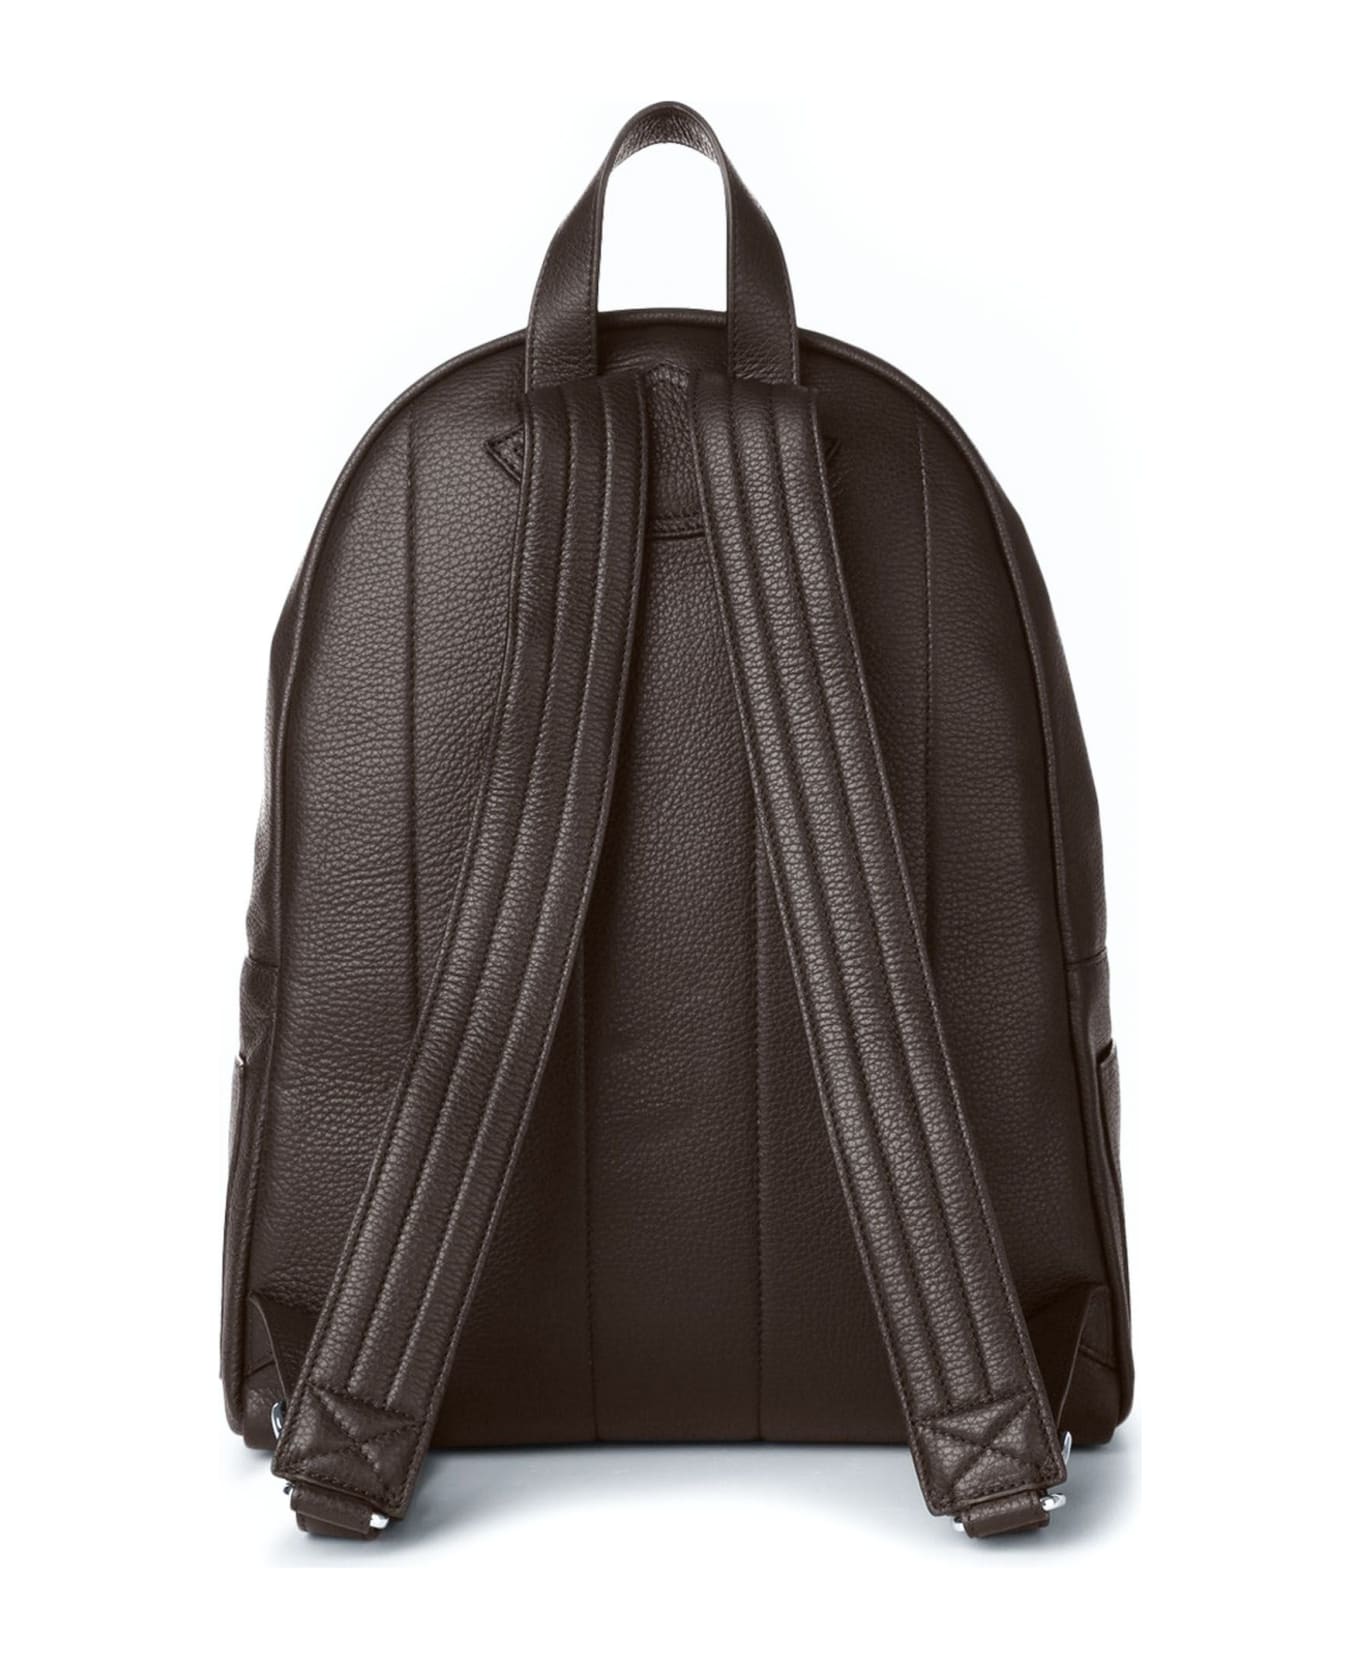 Orciani Brown Calf Leather Micron Backpack - Brown